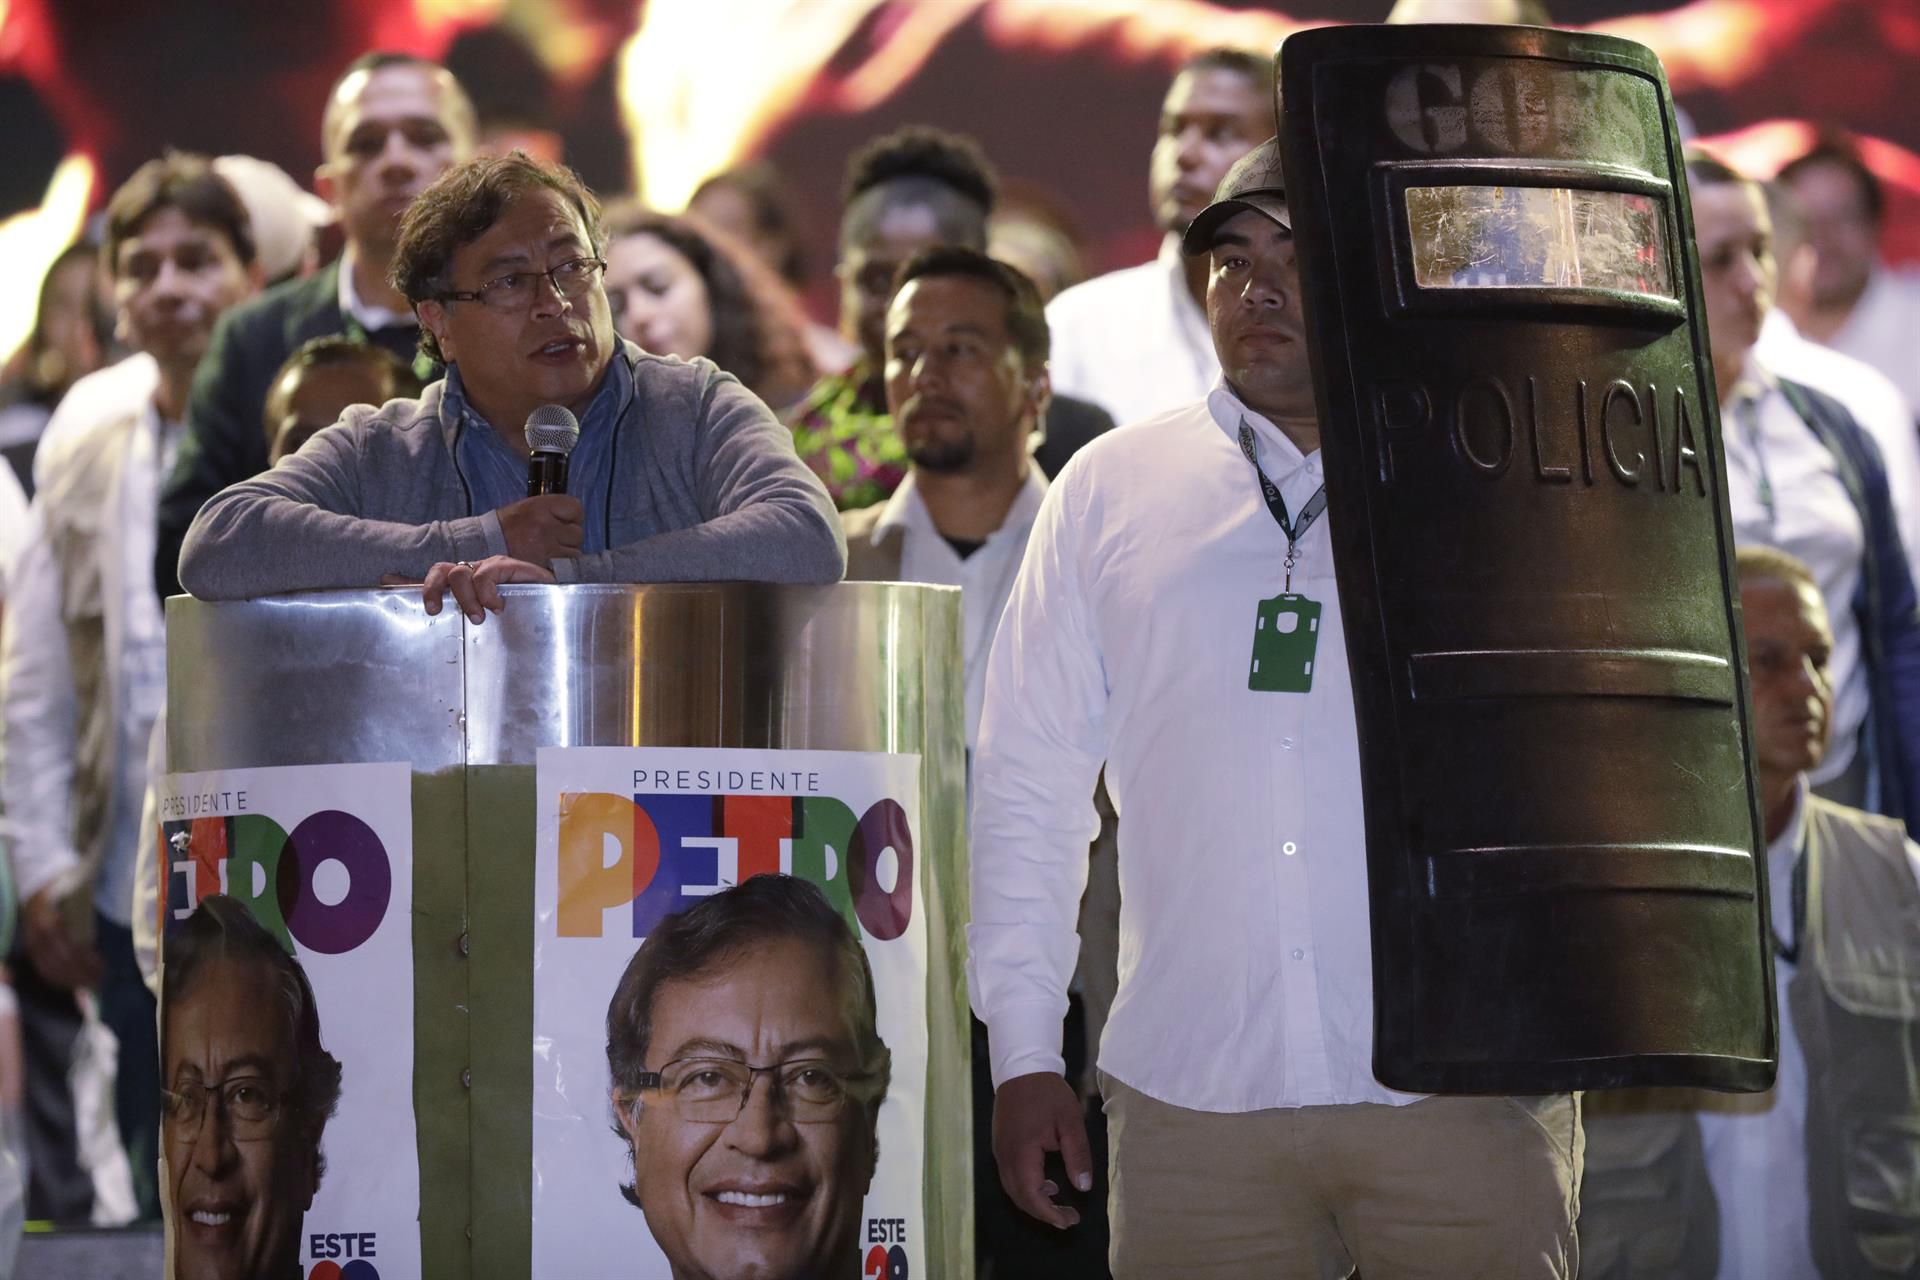 The left-wing candidate for the Presidency of Colombia, Gustavo Petro, speaks during the closing of his campaign in the central Plaza de Bolívar in Bogotá.  (EFE / Carlos Ortega).